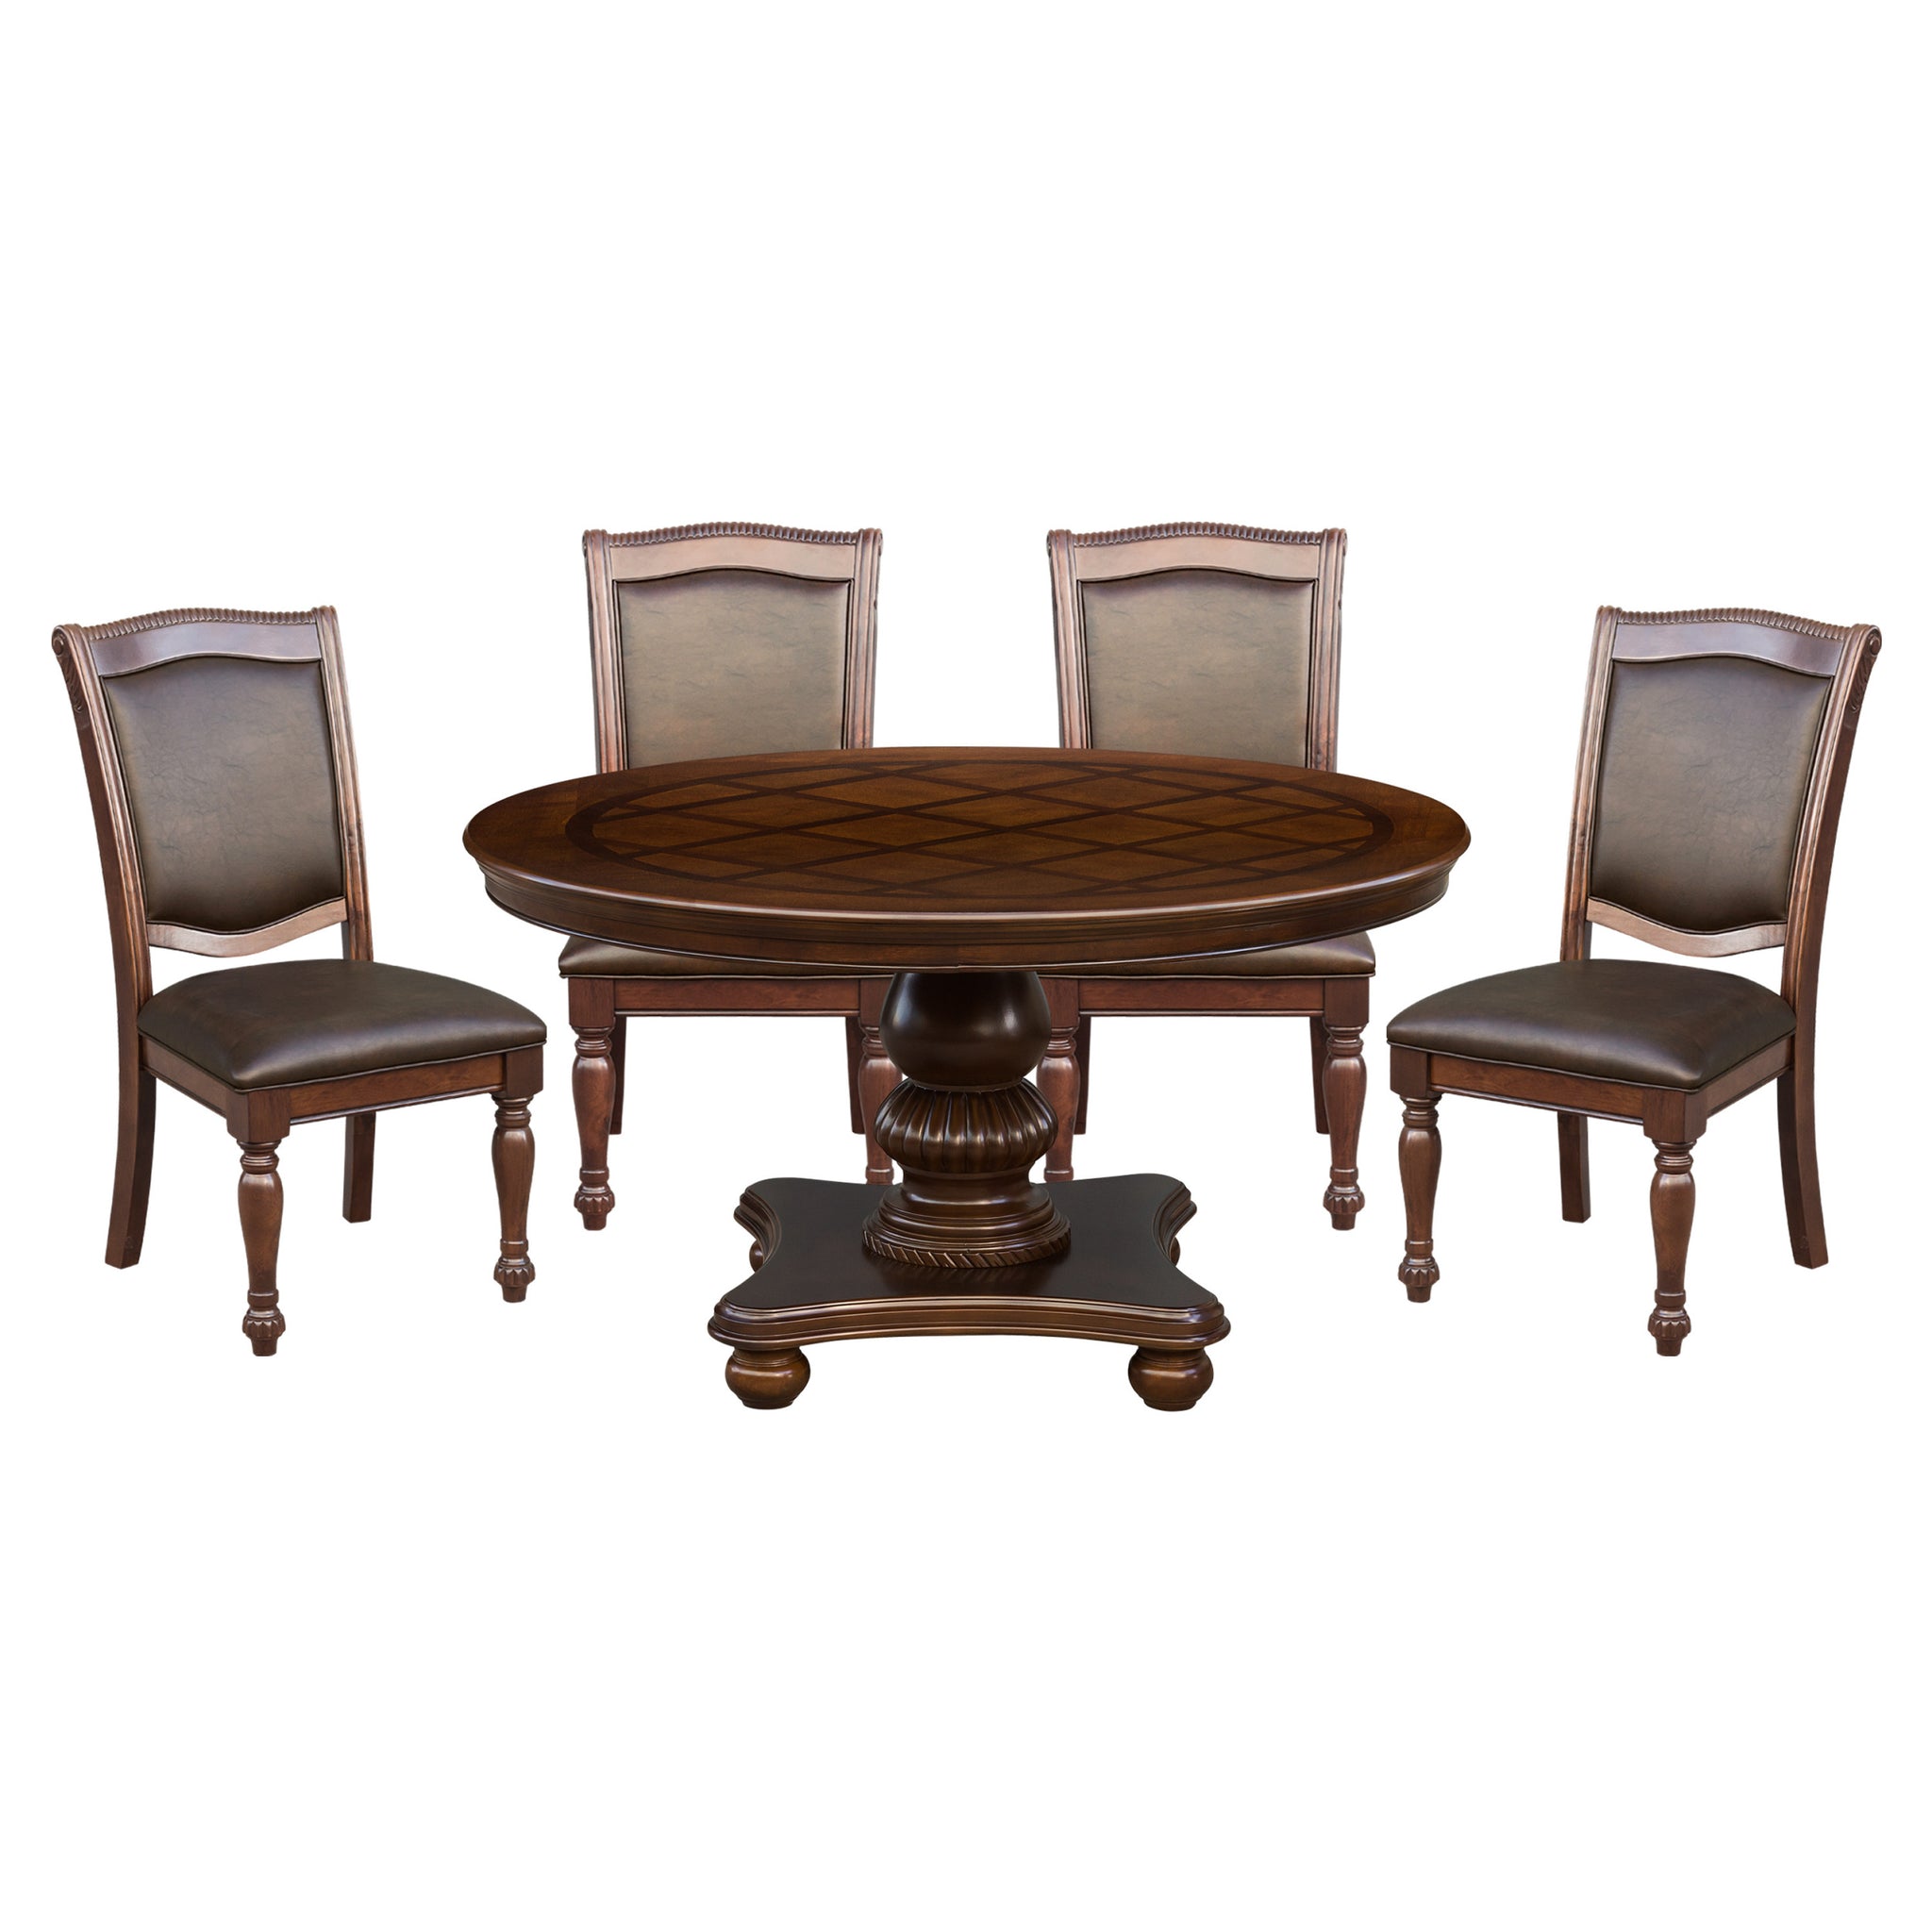 Traditional Dining Table 1pc Brown Cherry Finish brown mix-dining room-traditional-wood